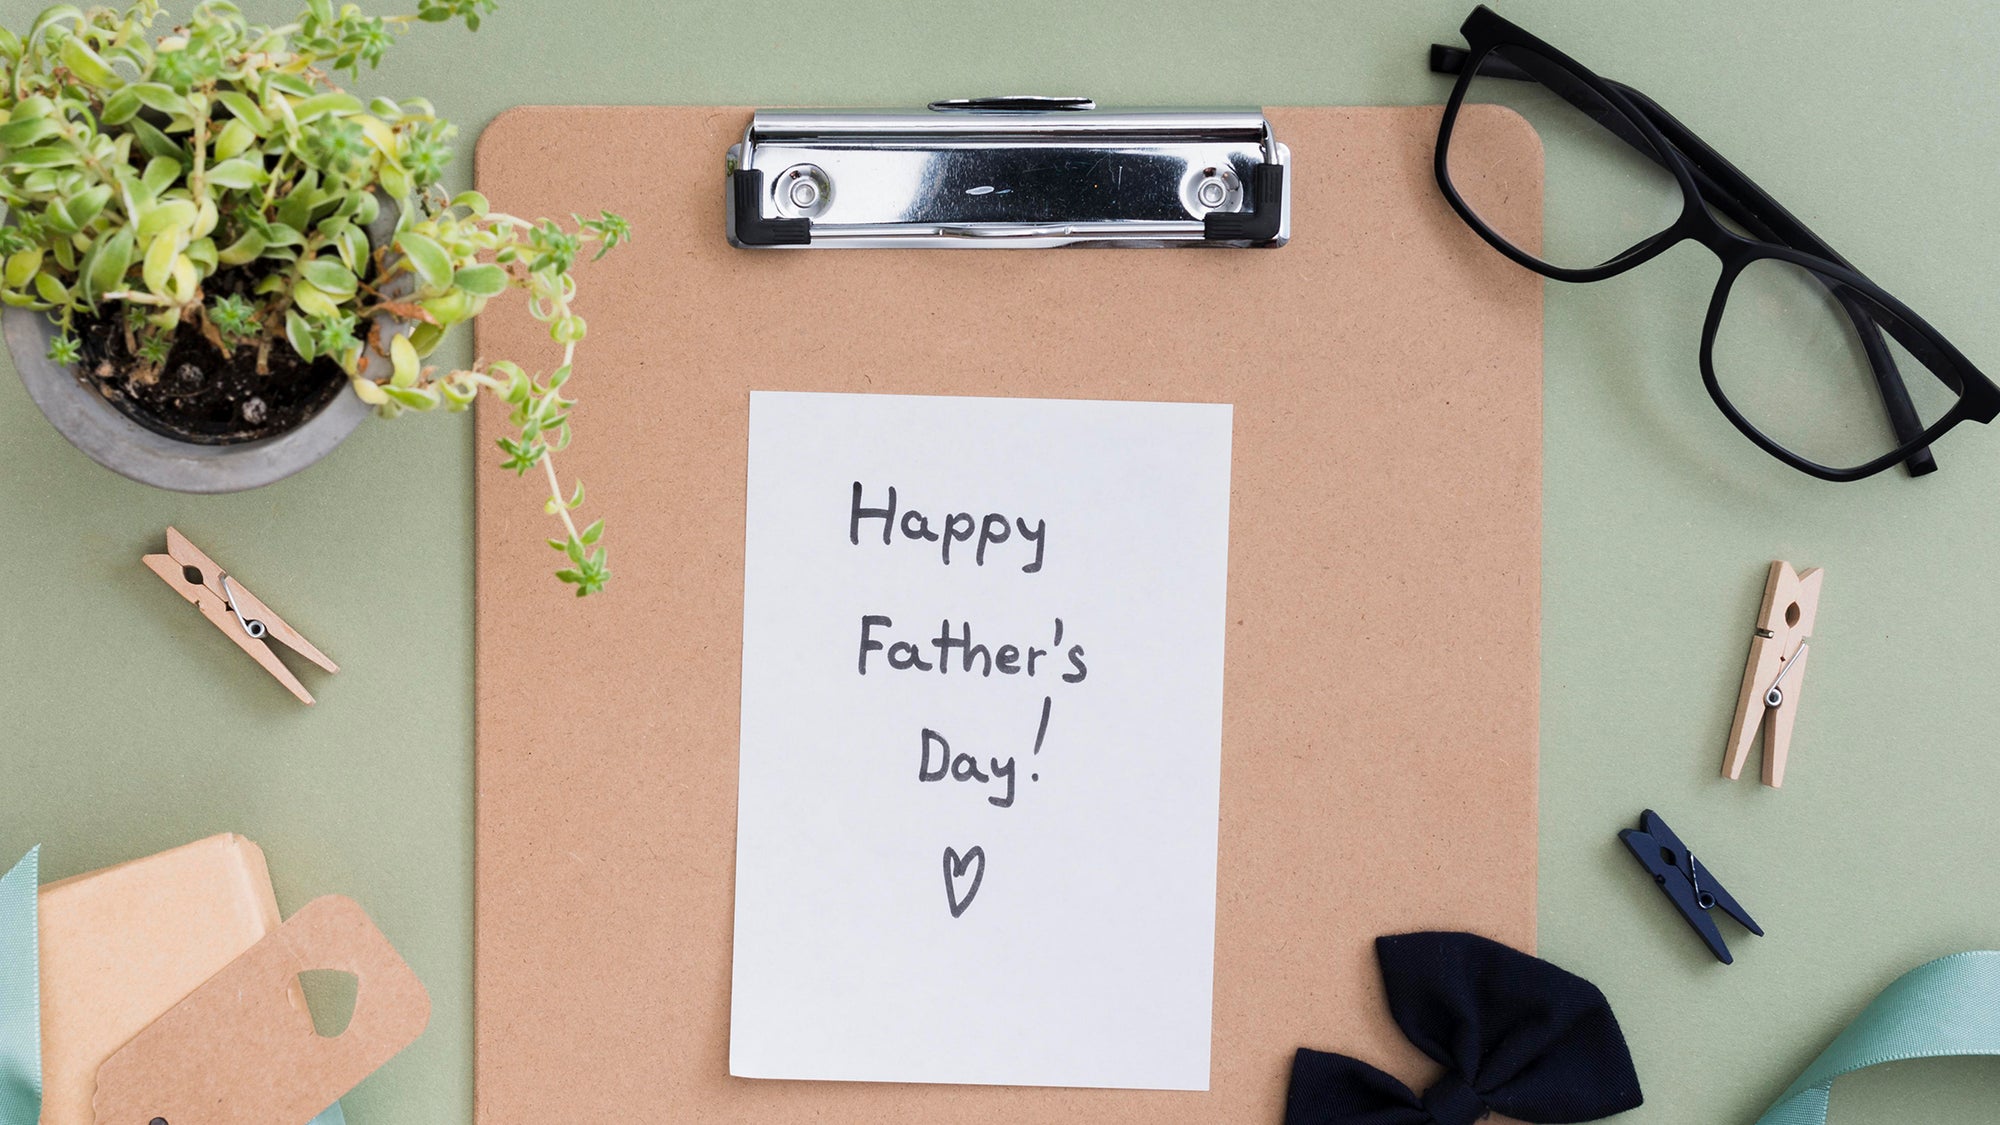 Top 10 Best Gift Ideas For Father’s Day